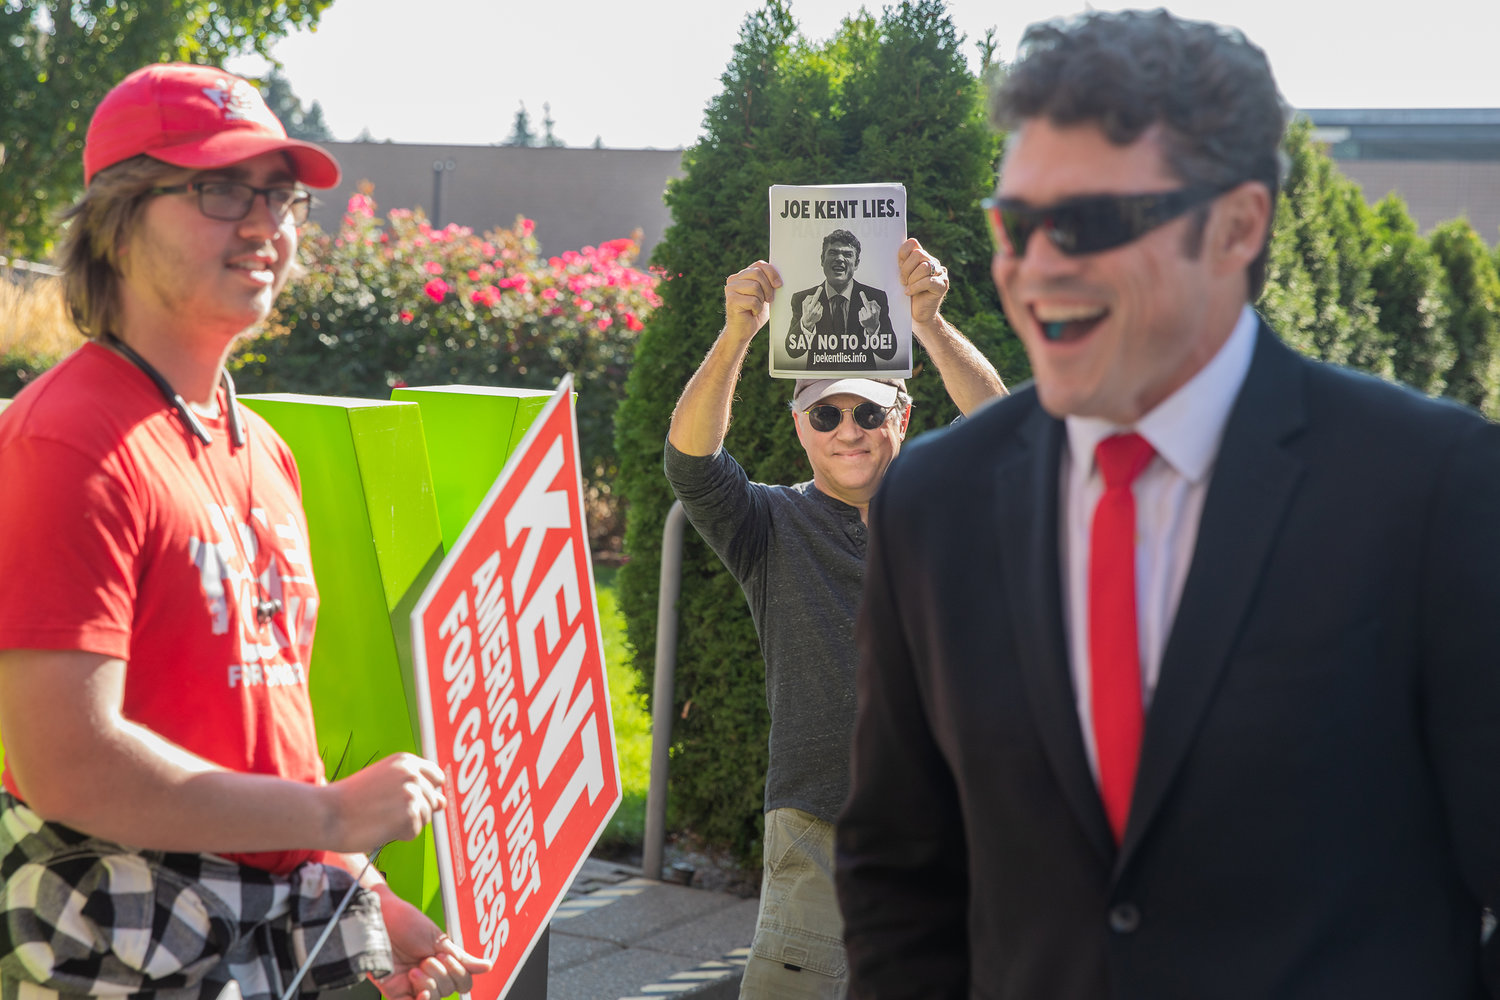 Joe Kent smiles alongside supporters and protesters outside the Vancouver Community Library Saturday afternoon ahead of the Congressional 3rd District Debate.